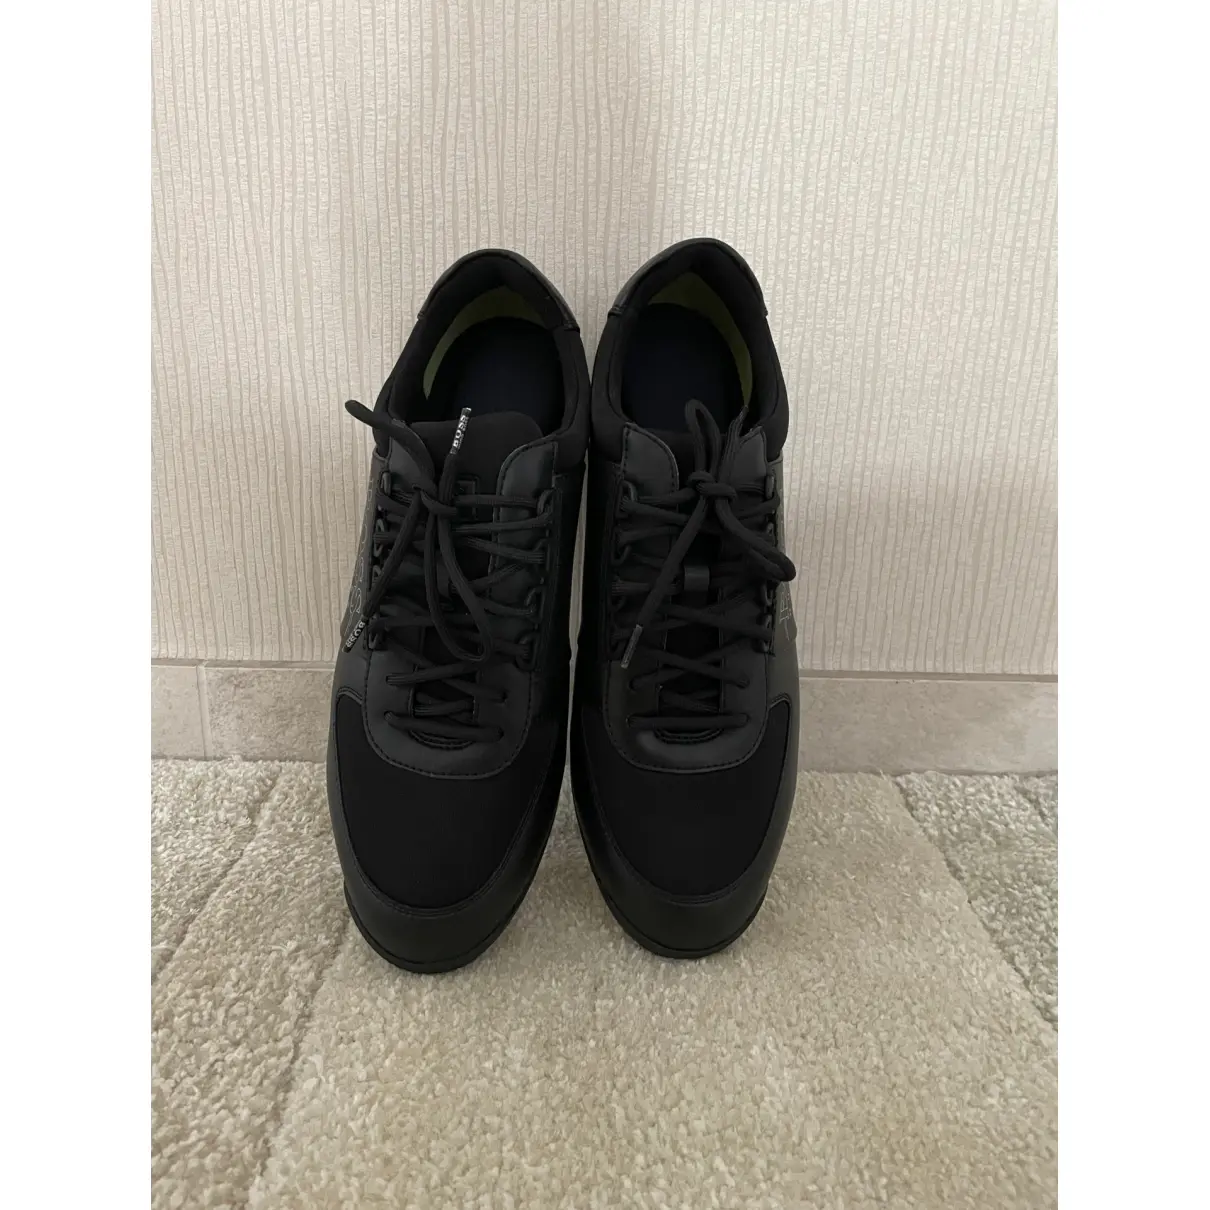 Buy Hugo Boss Leather low trainers online